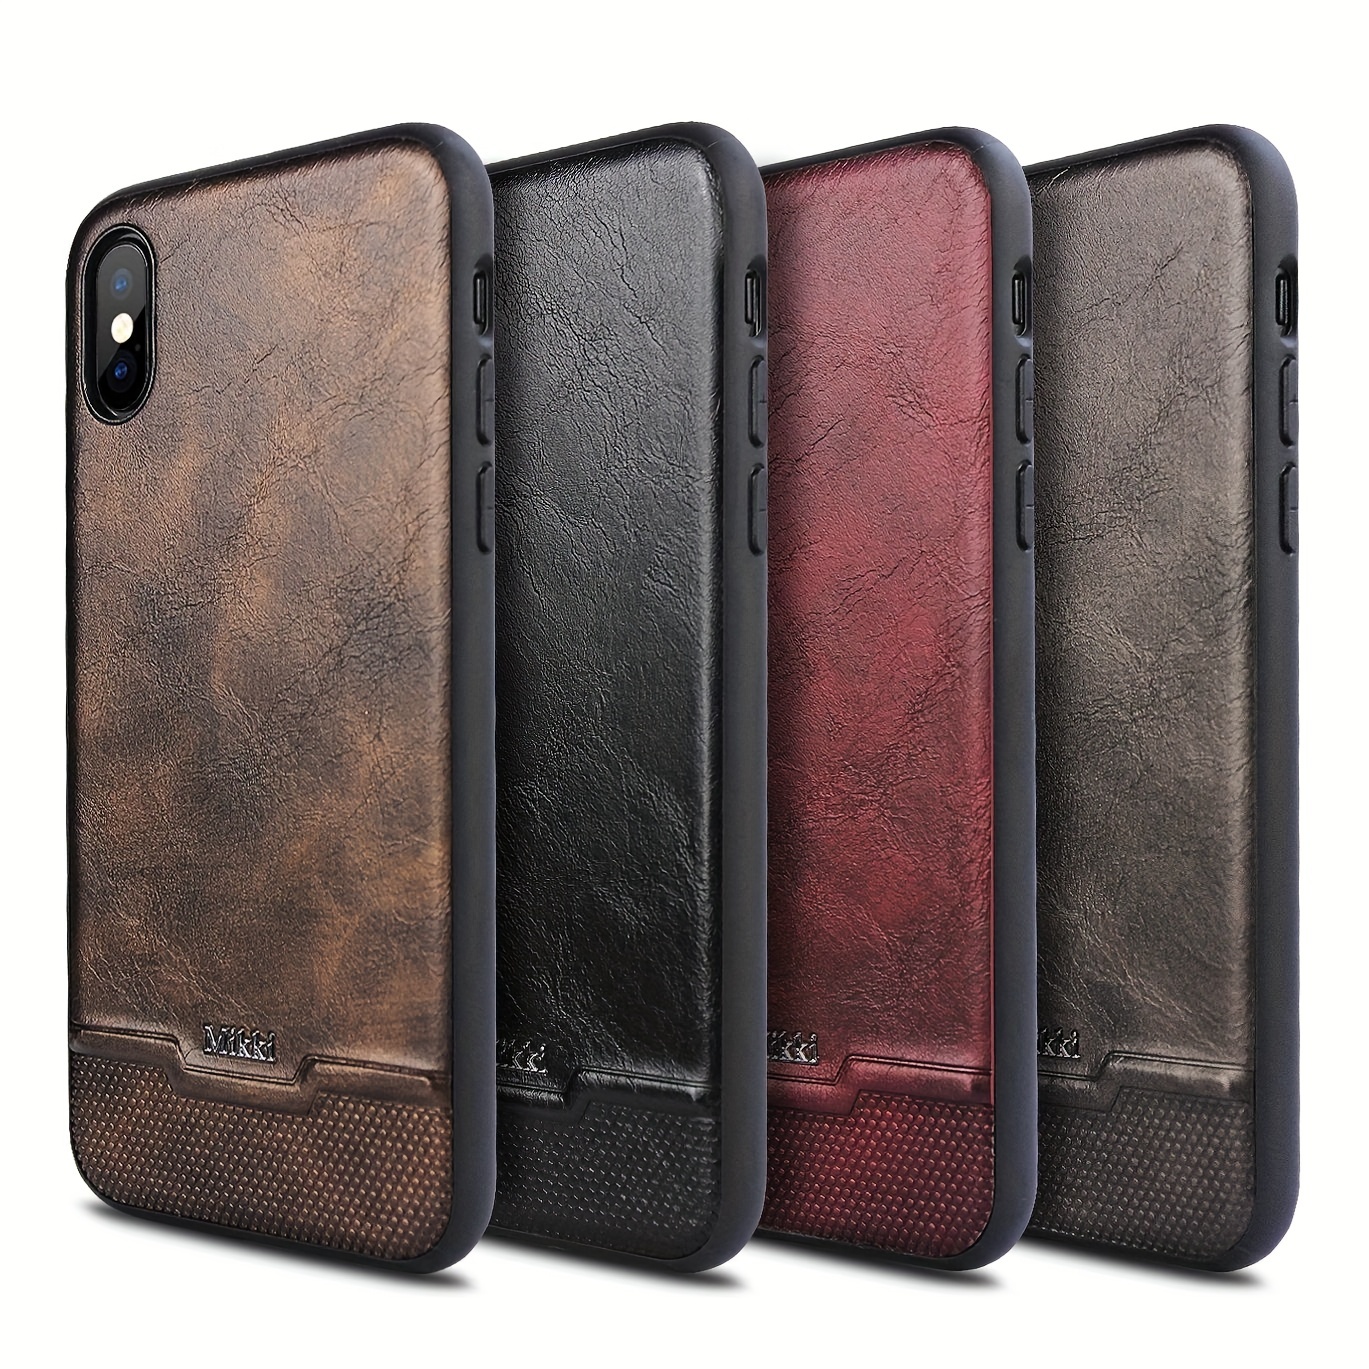 Luxury pearl No. 5 perfume metal Hard leather phone case for iphone X XR XS  MAX 7 8 6 6s plus 12 SE 11 Pro Lambskin back cover